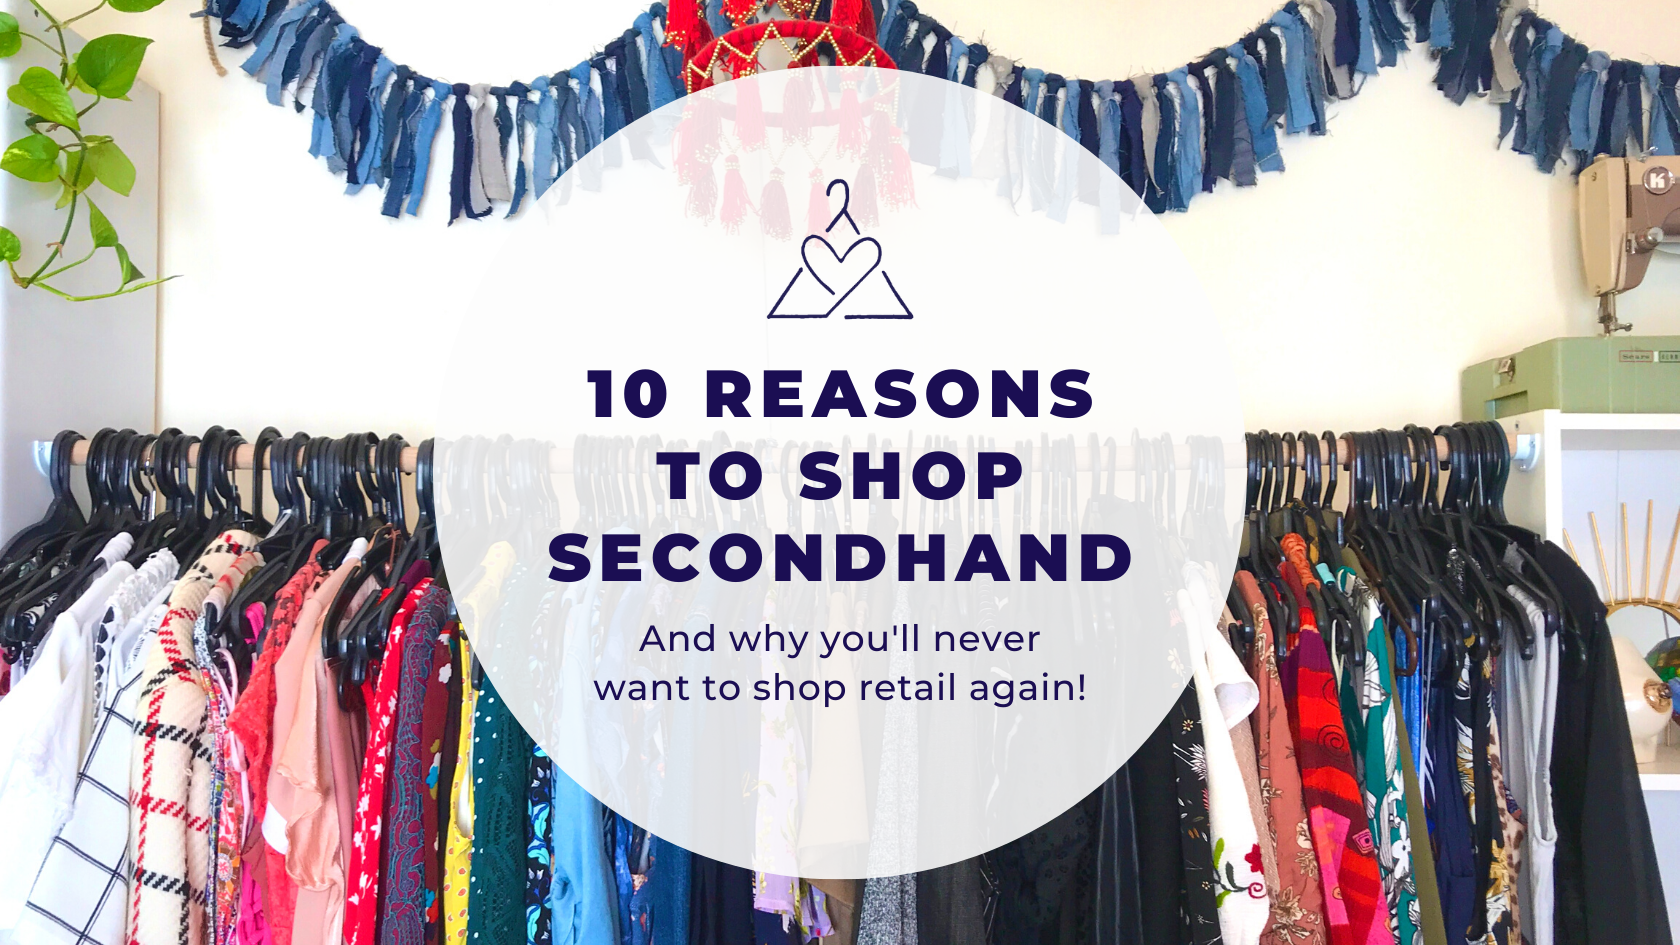 10 Reasons to Shop Secondhand